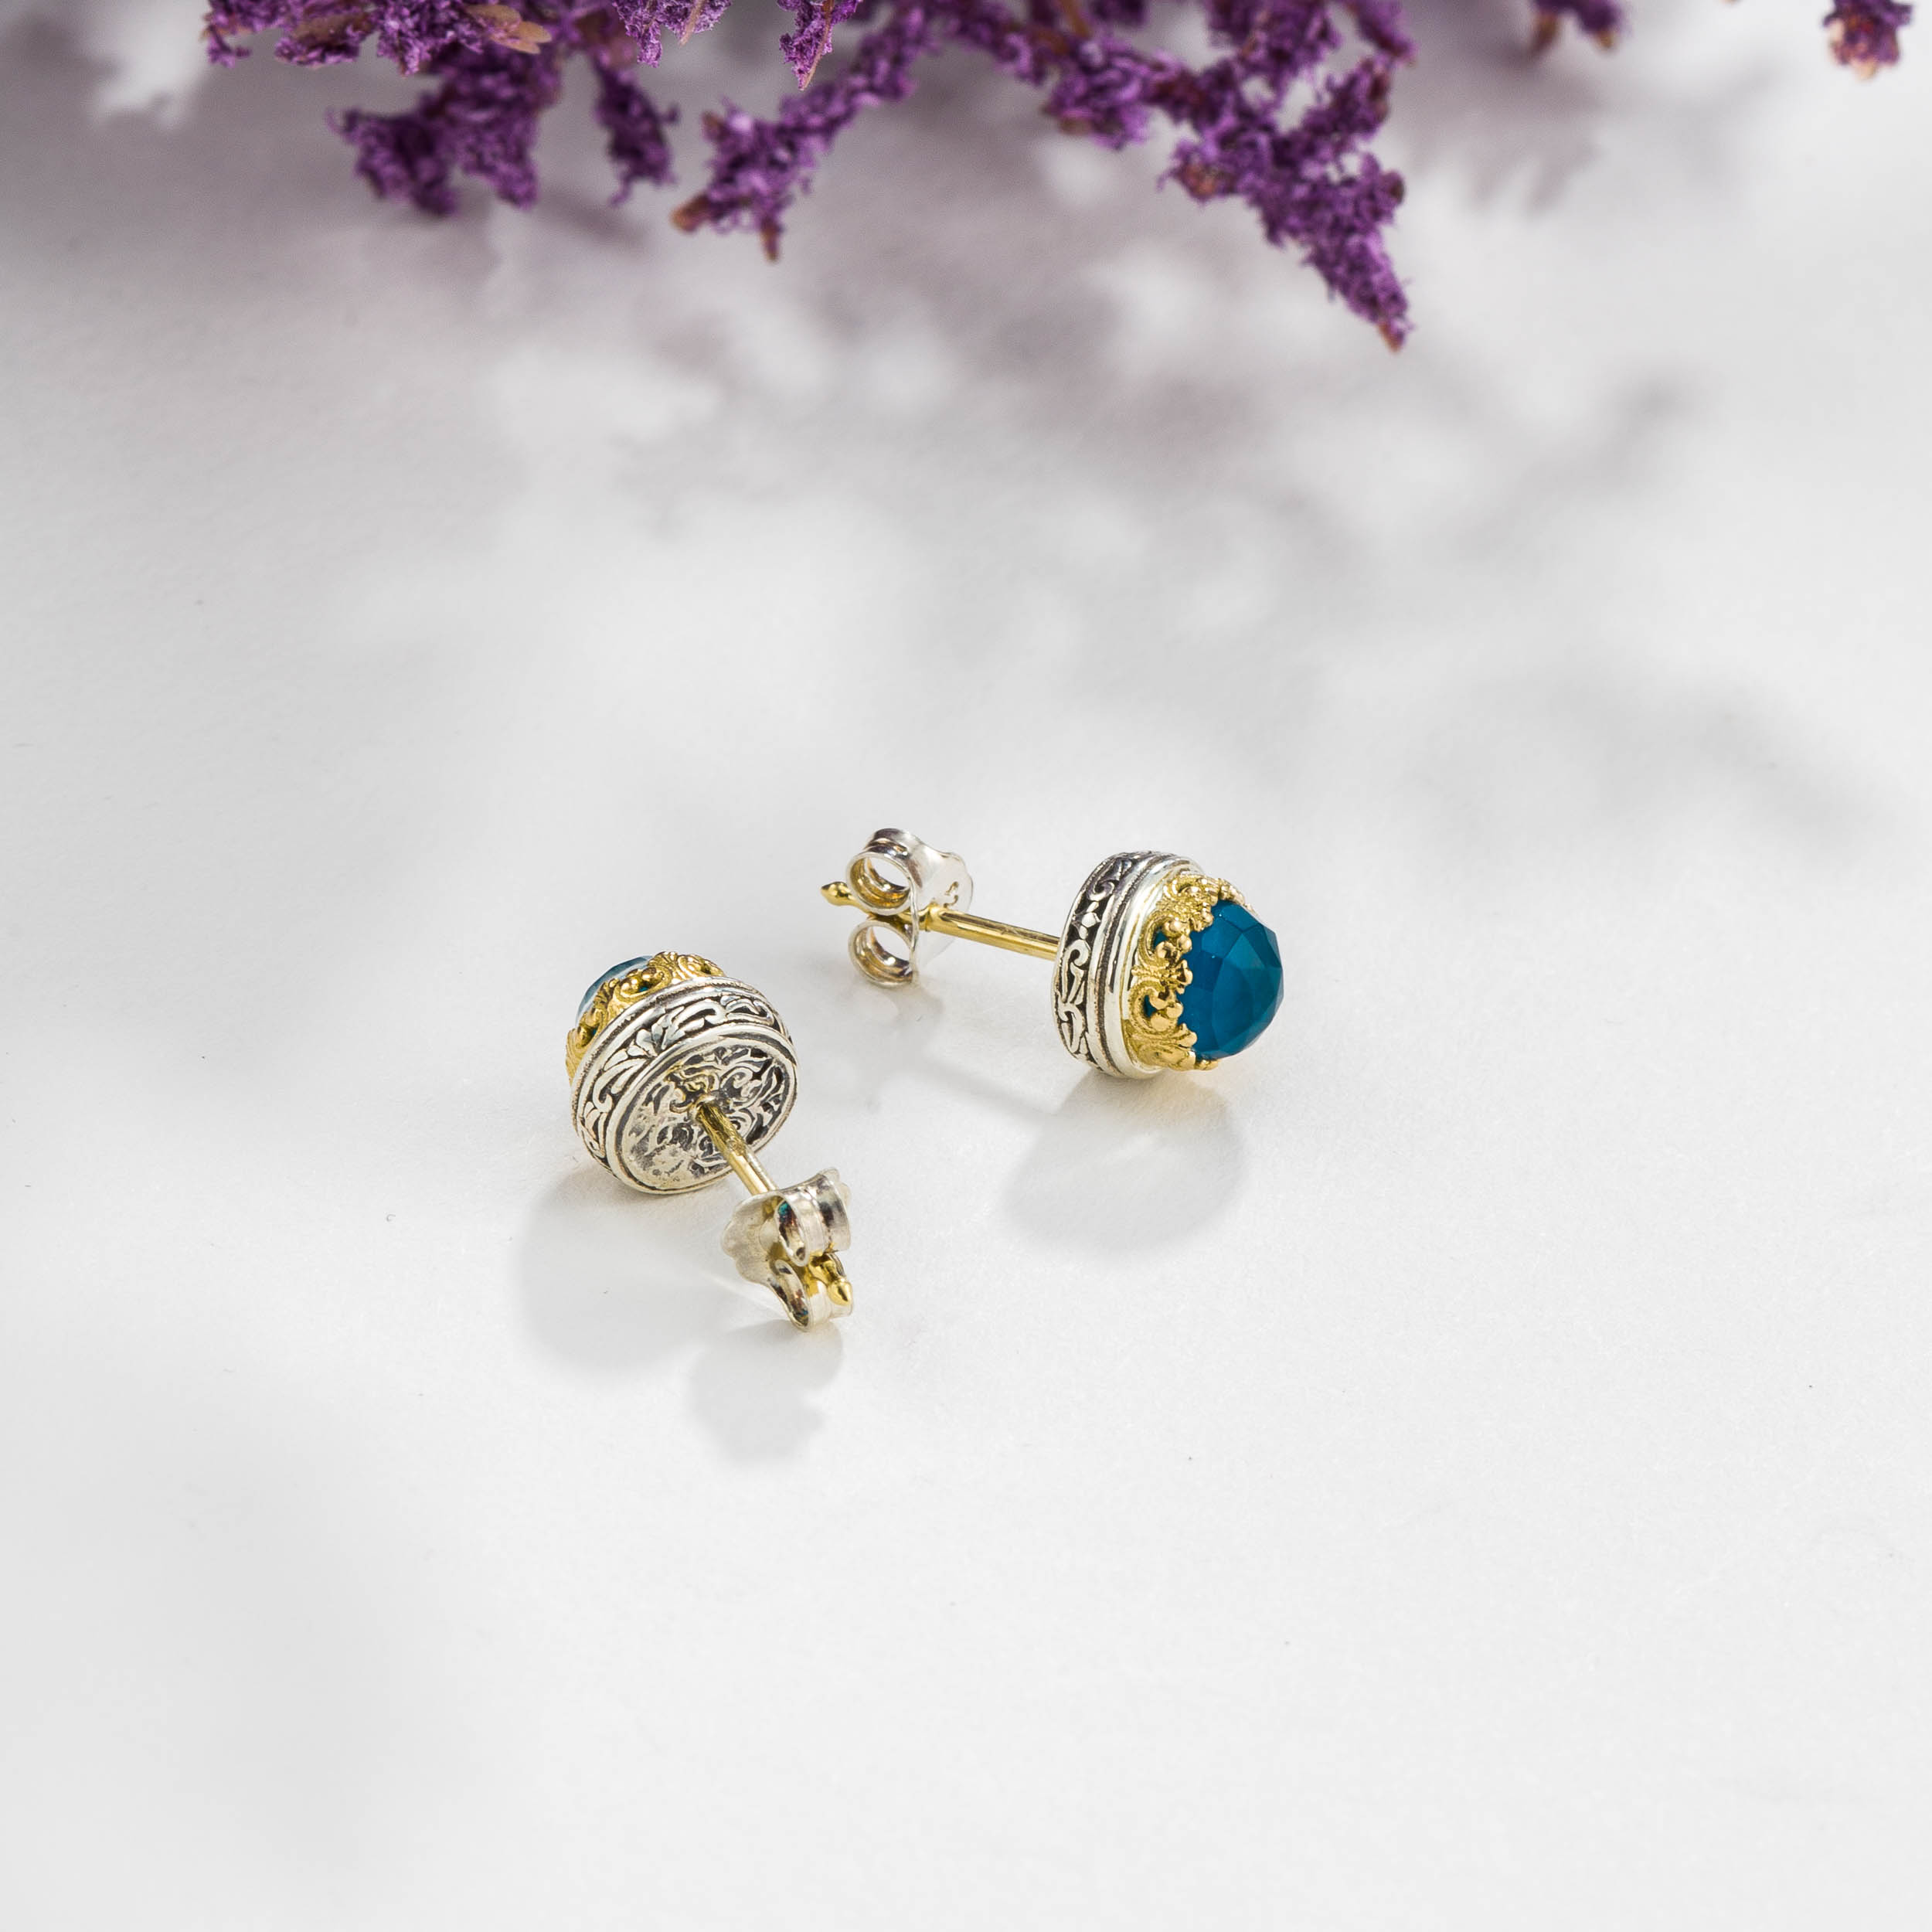 Iris round stud earrings in 18K Gold and Sterling Silver with doublet stones